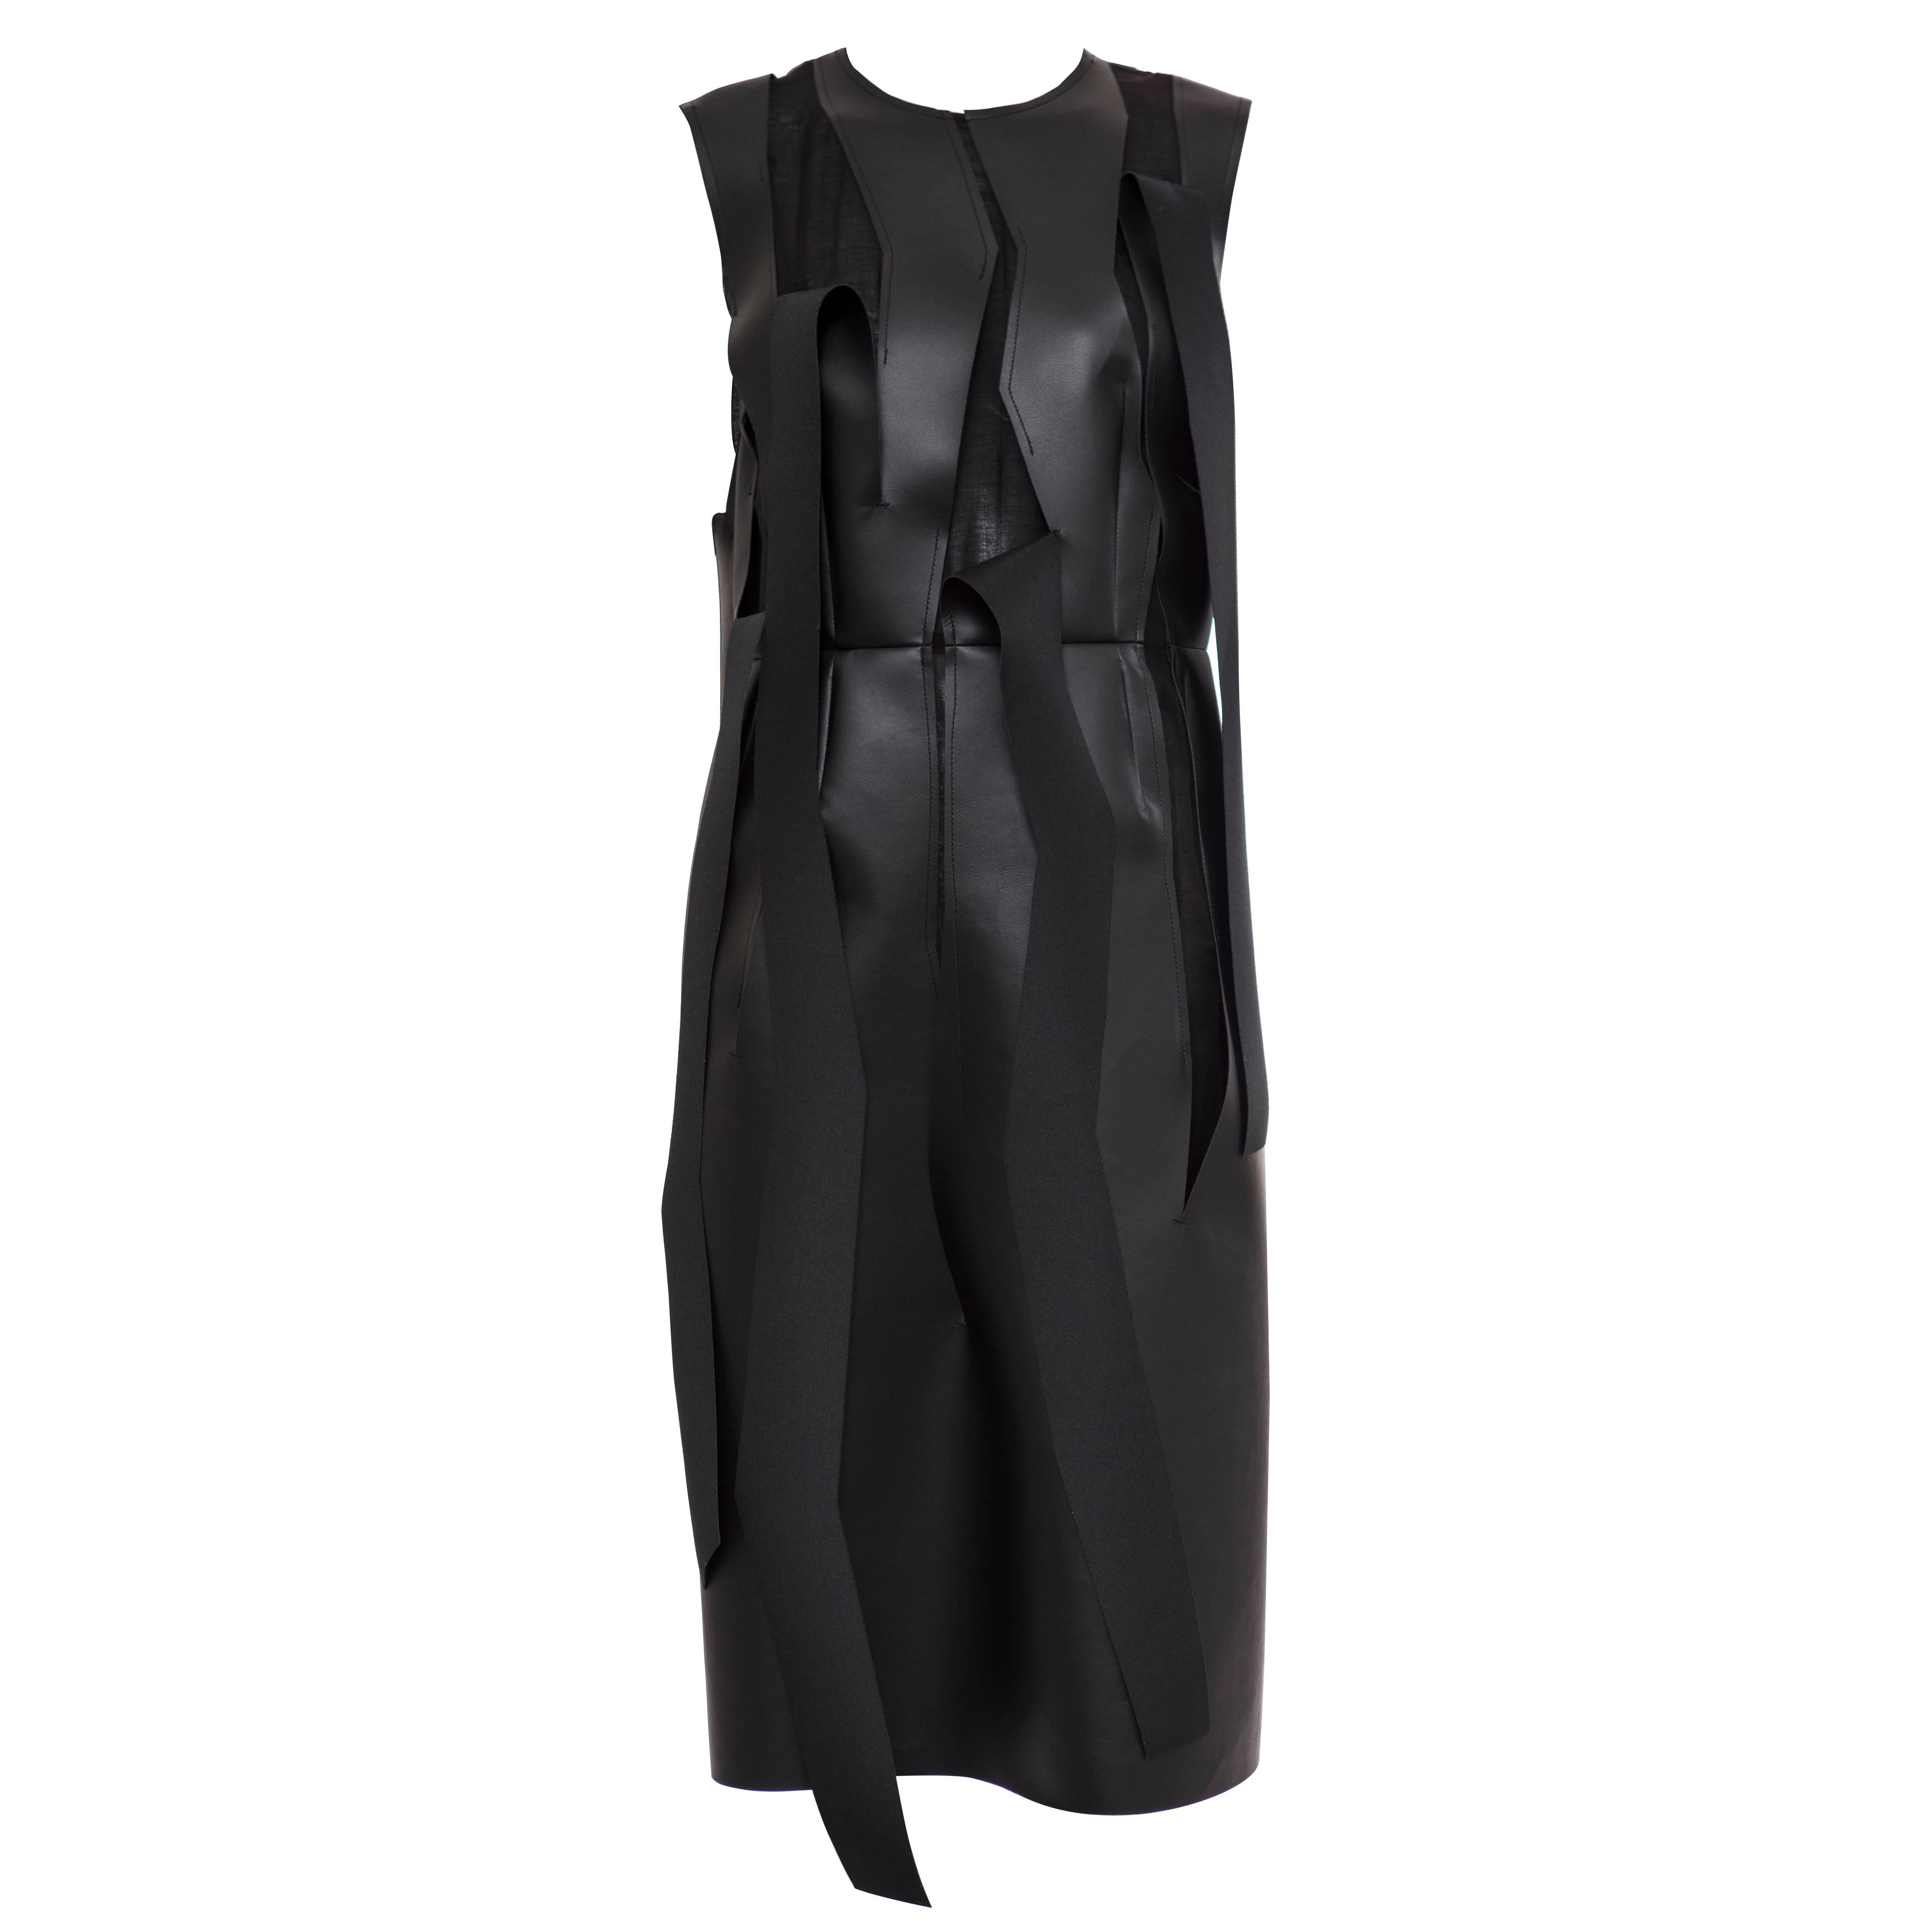 Comme des Garcons Black Synthetic Leather With Cutout Strips Dress, Circa 2014